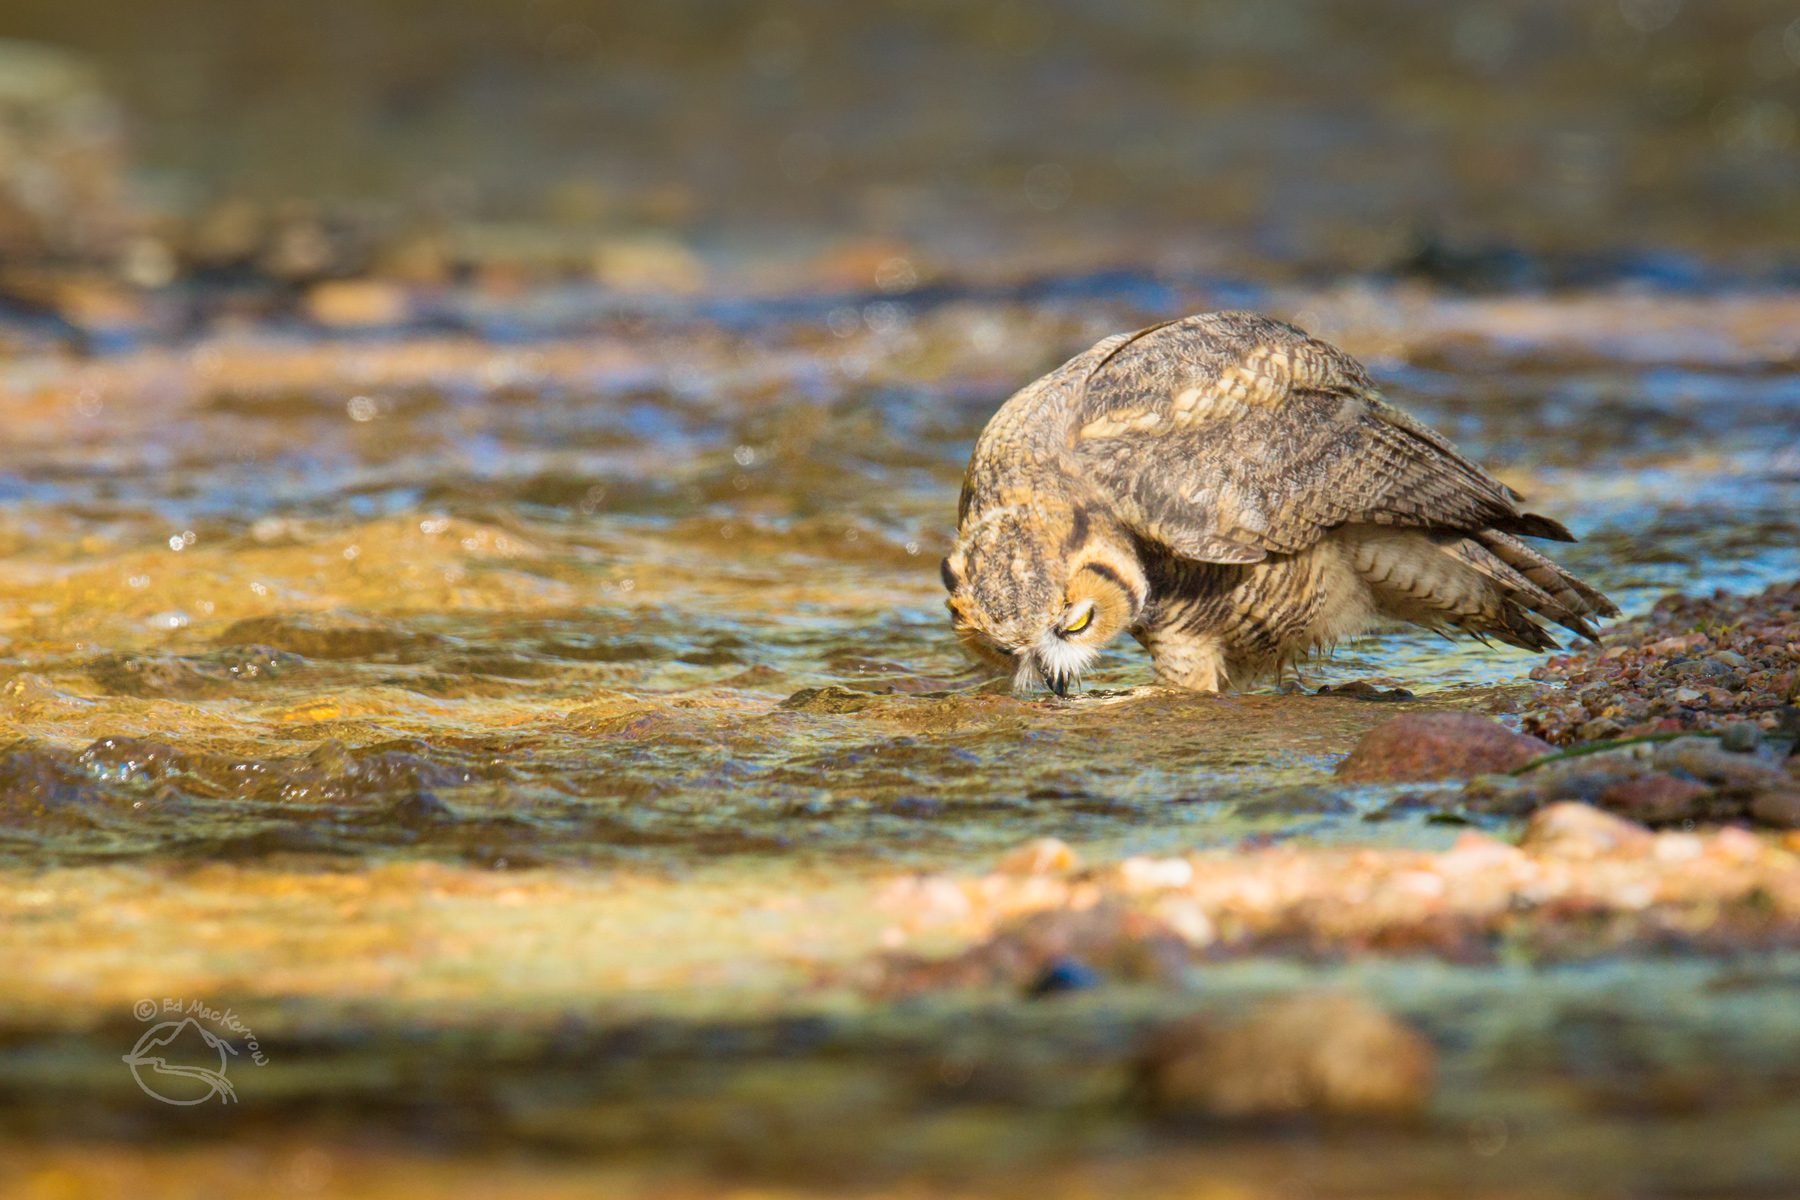 Great Horned Owl drinking water from stream